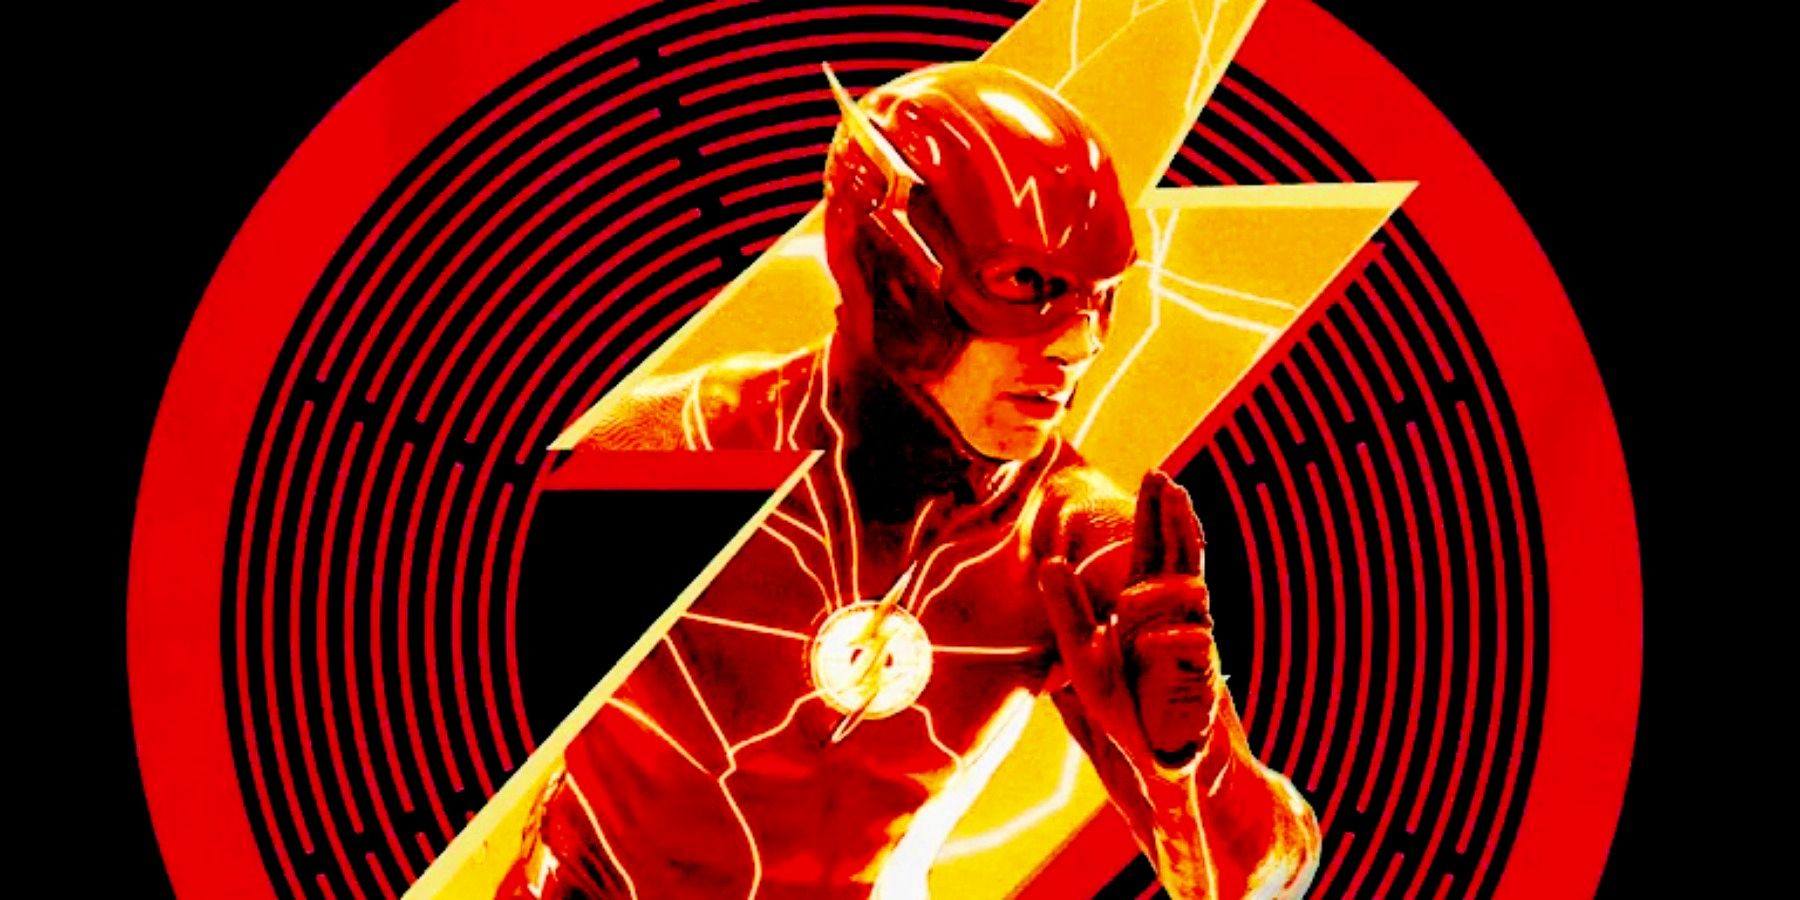 The Flash red black and yellow poster artwork